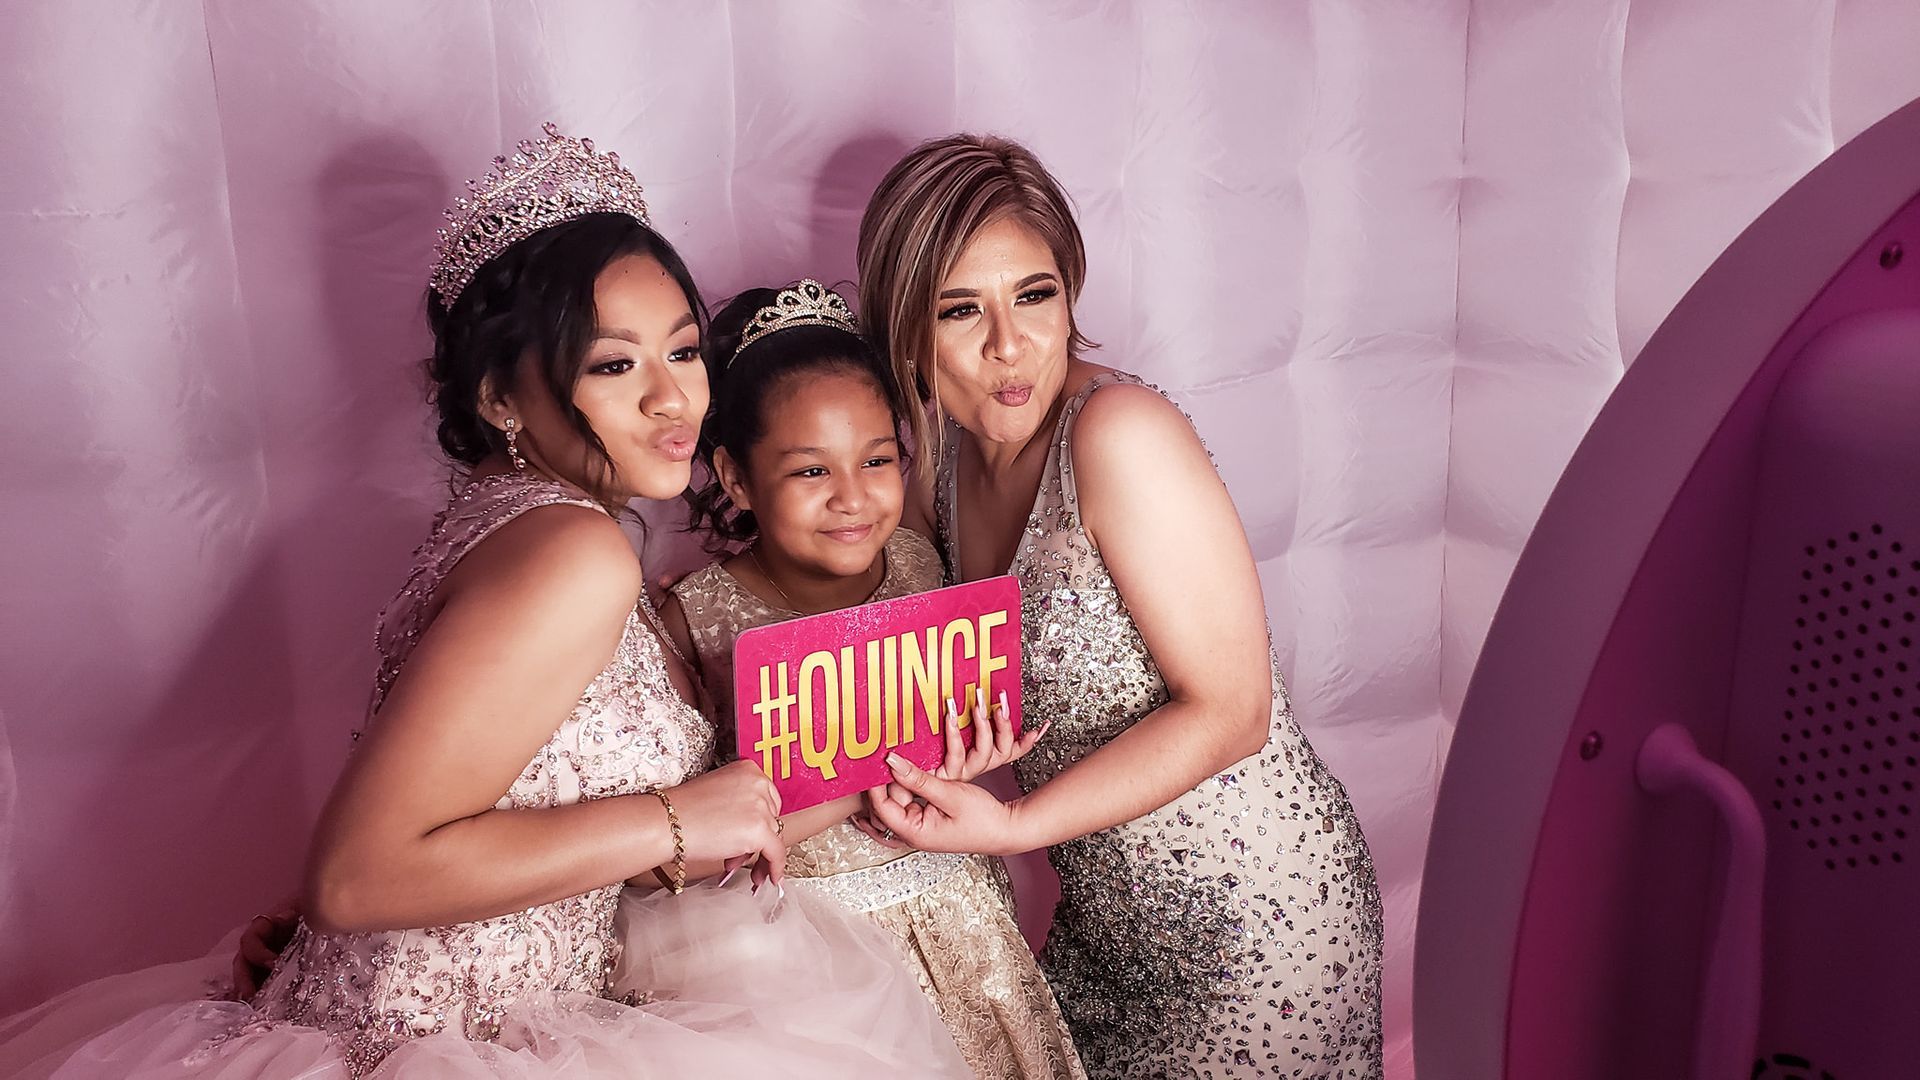 Sugar Land's photo booth rental company ensures that every guest at this Sugar Land Quince Party enjoys an amazing time!